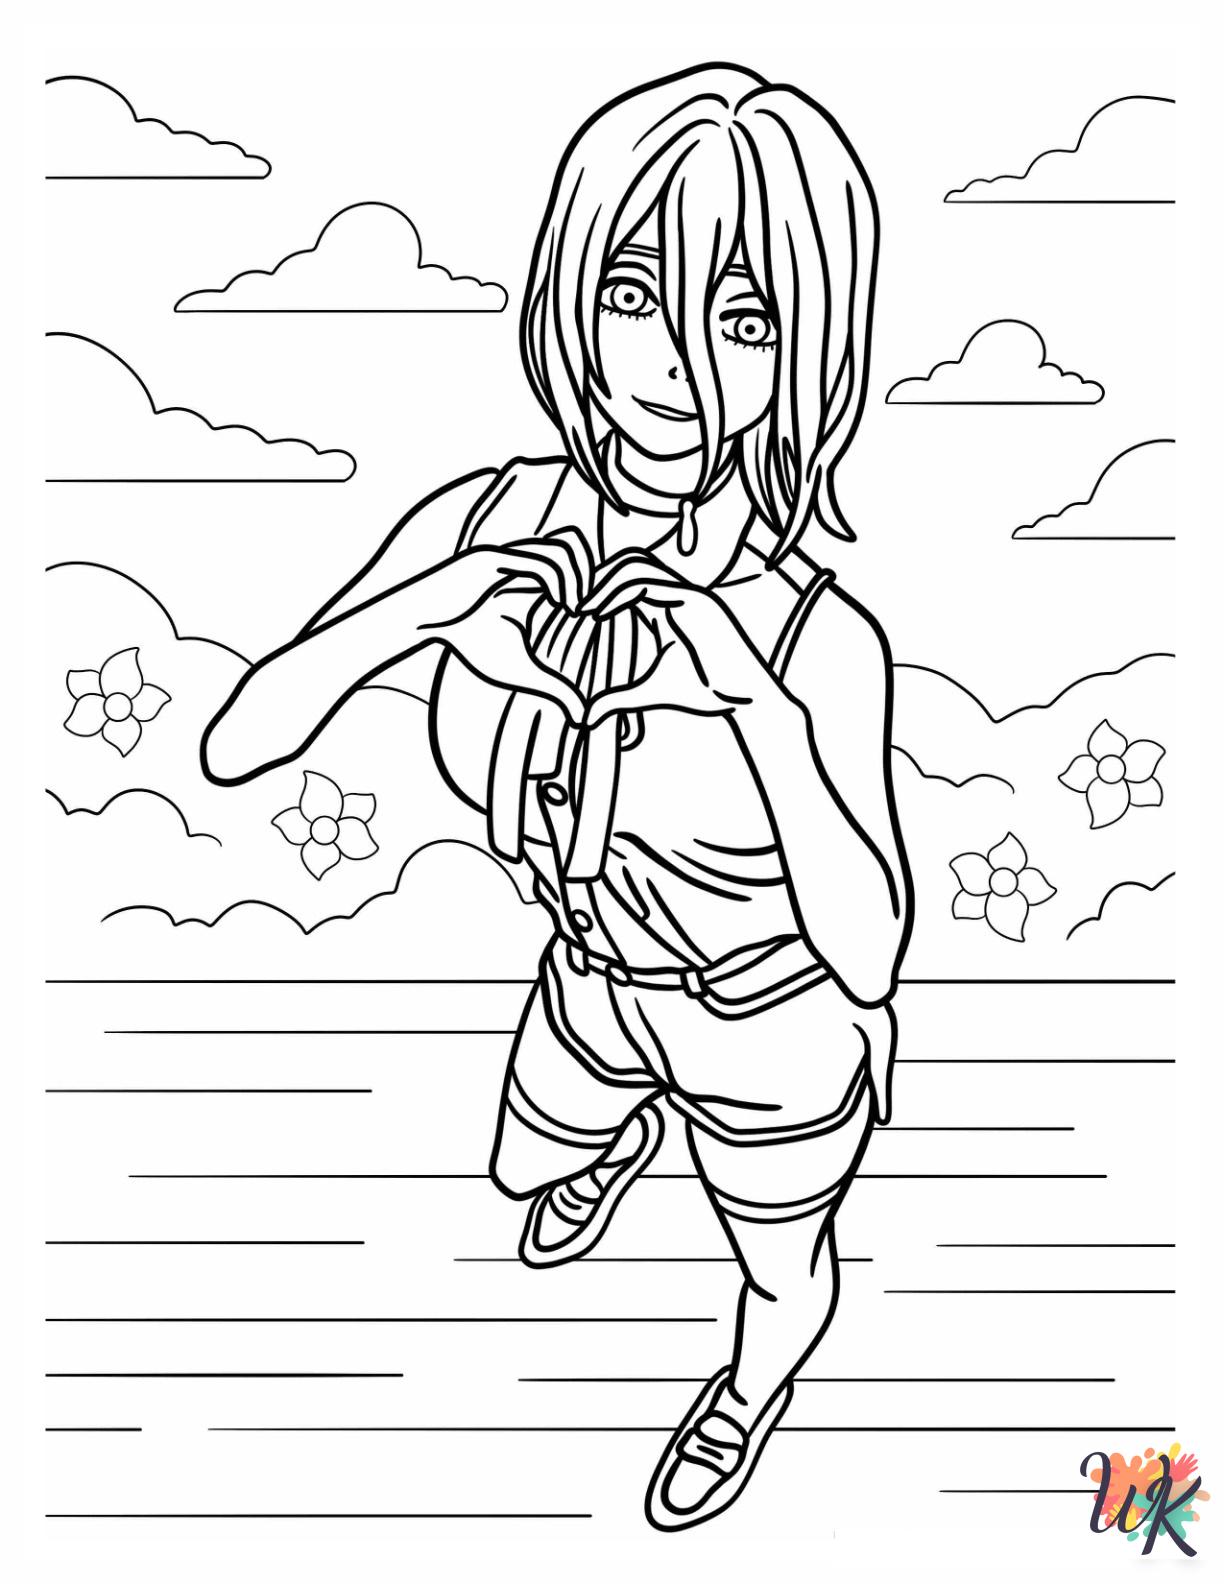 Chainsaw Man ornaments coloring pages